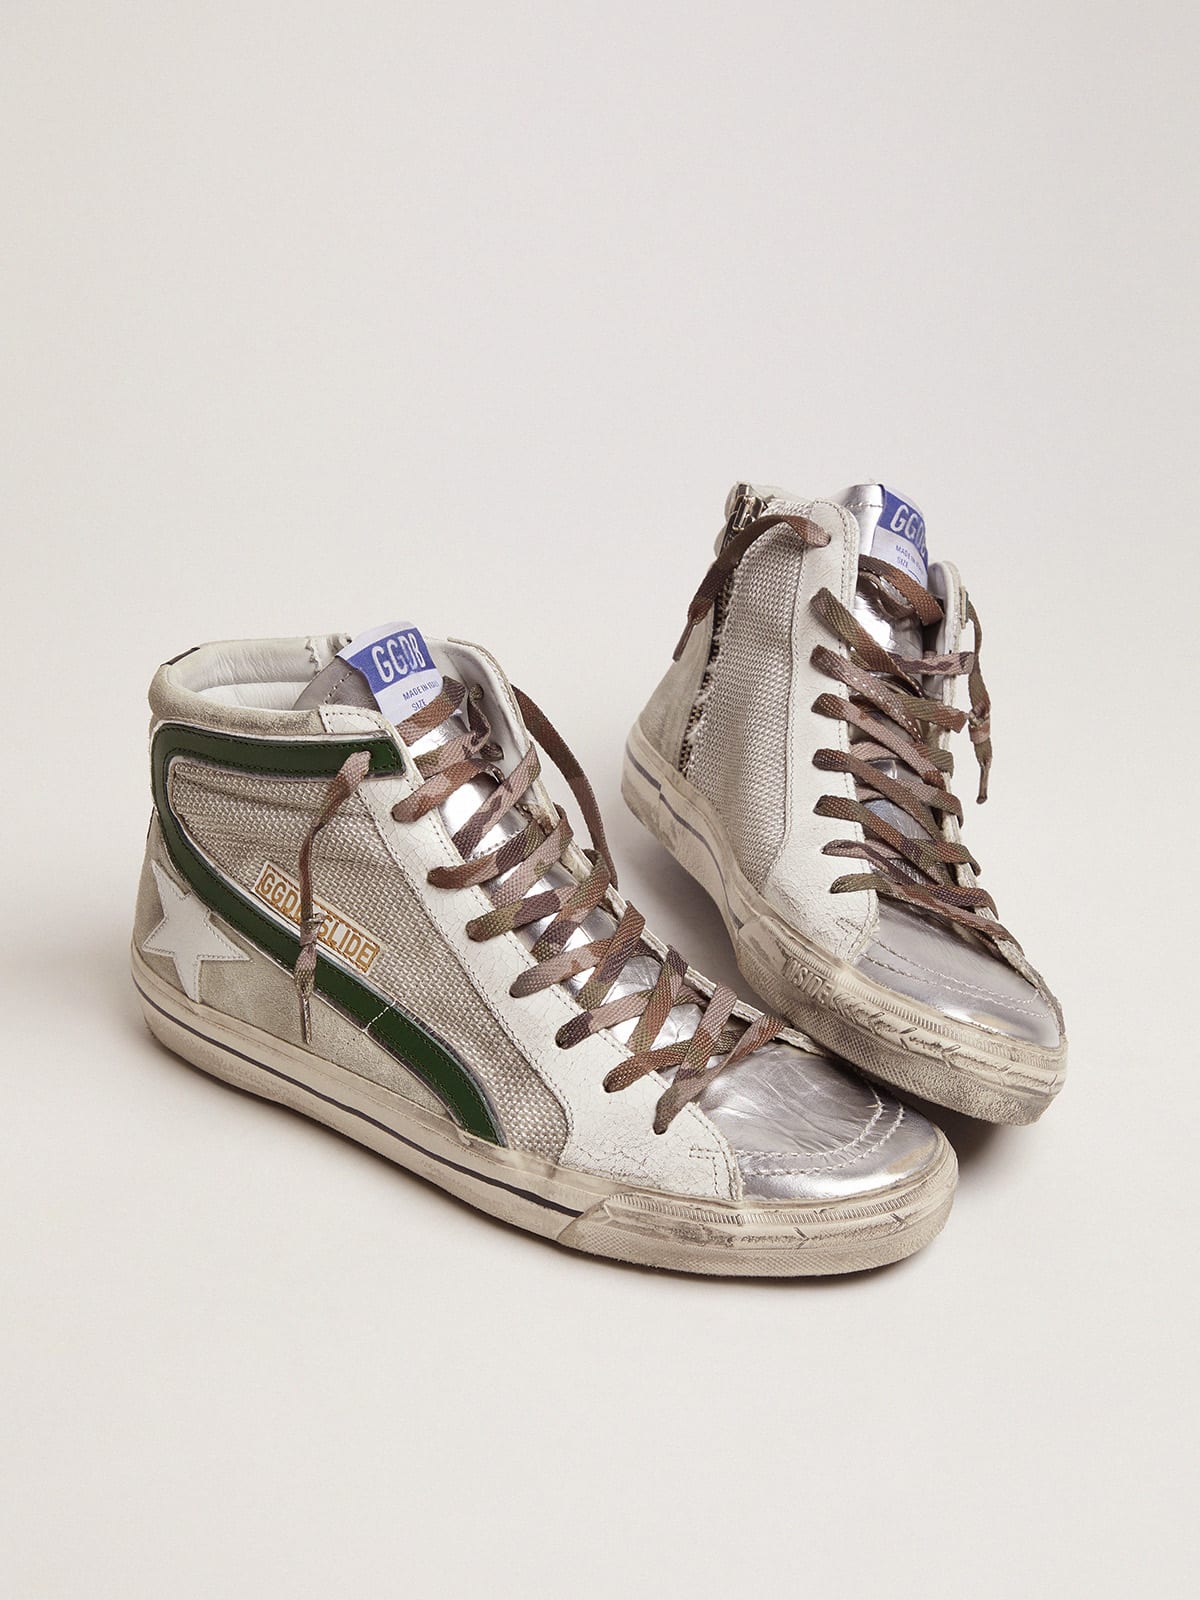 Slide LTD sneakers in leather and mesh with green flash | Golden Goose